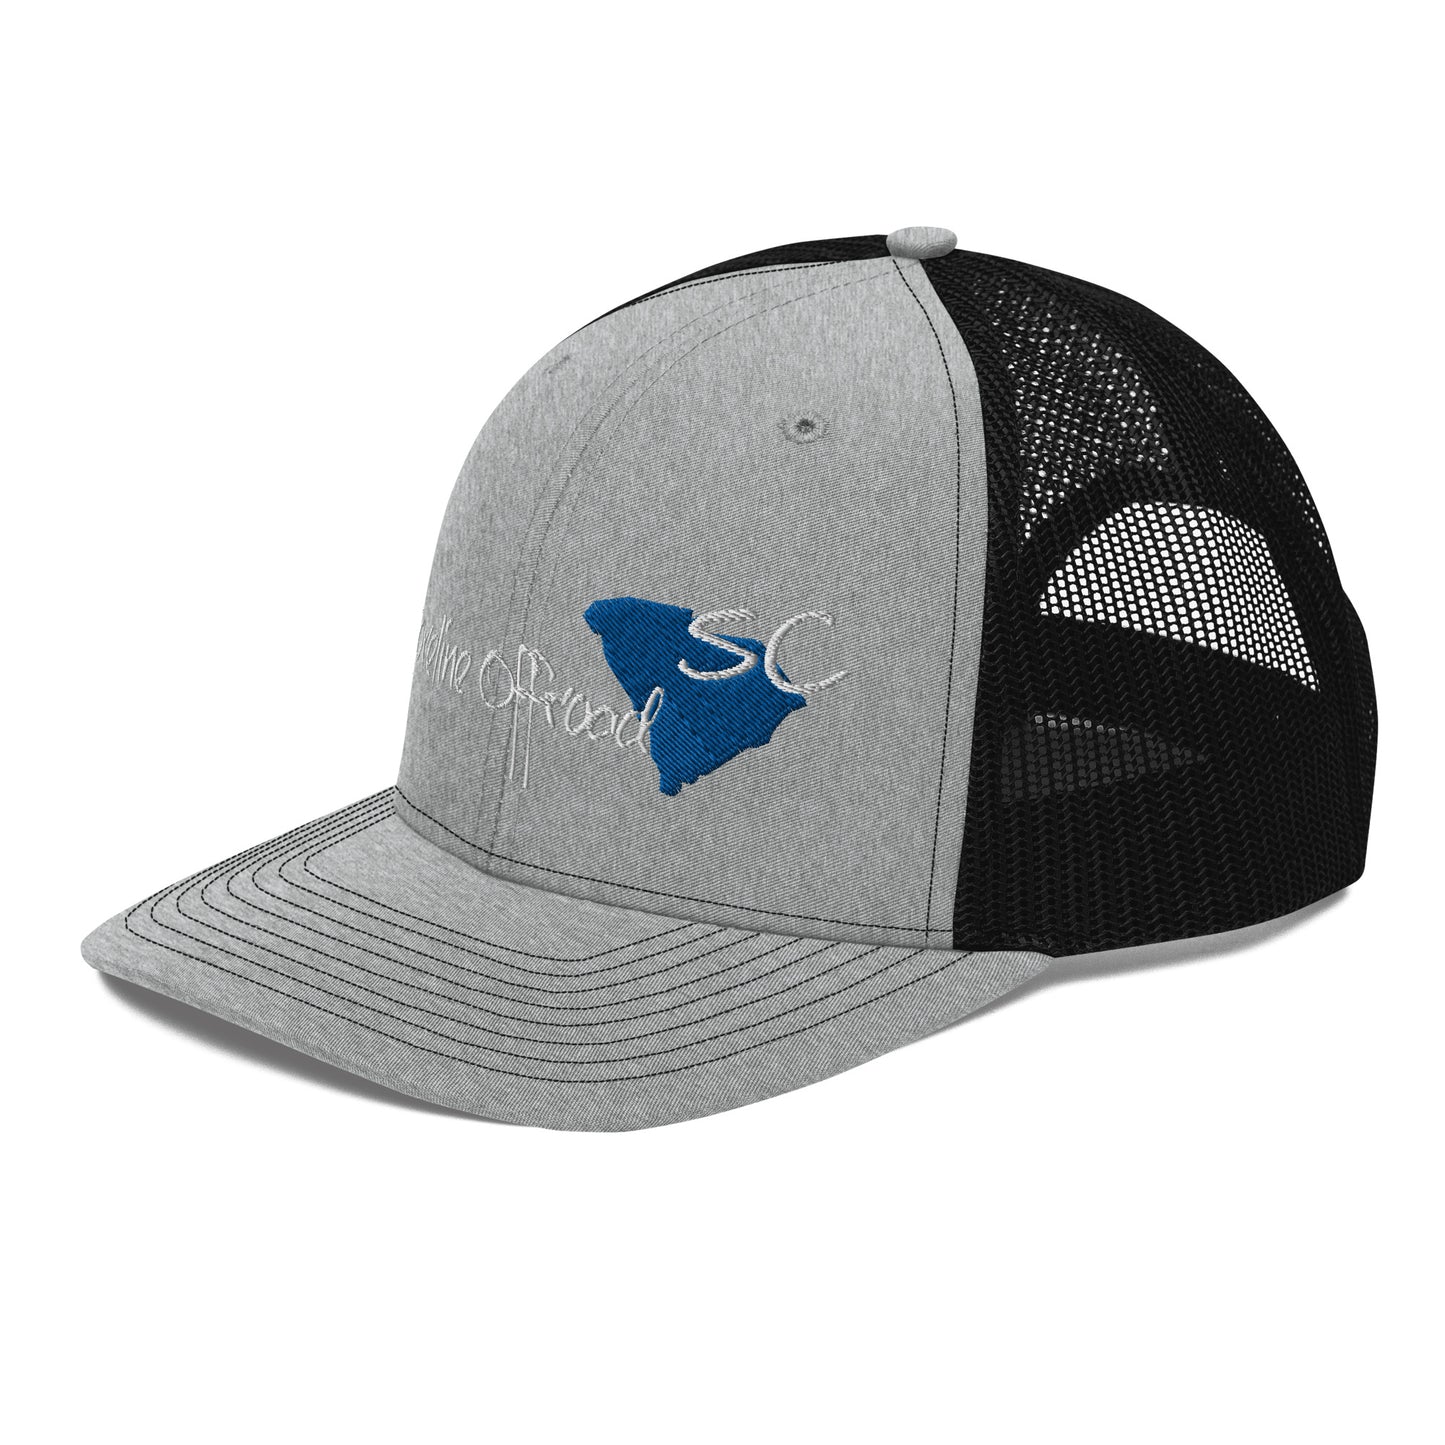 a gray and black trucker hat with the state of south carolina on it